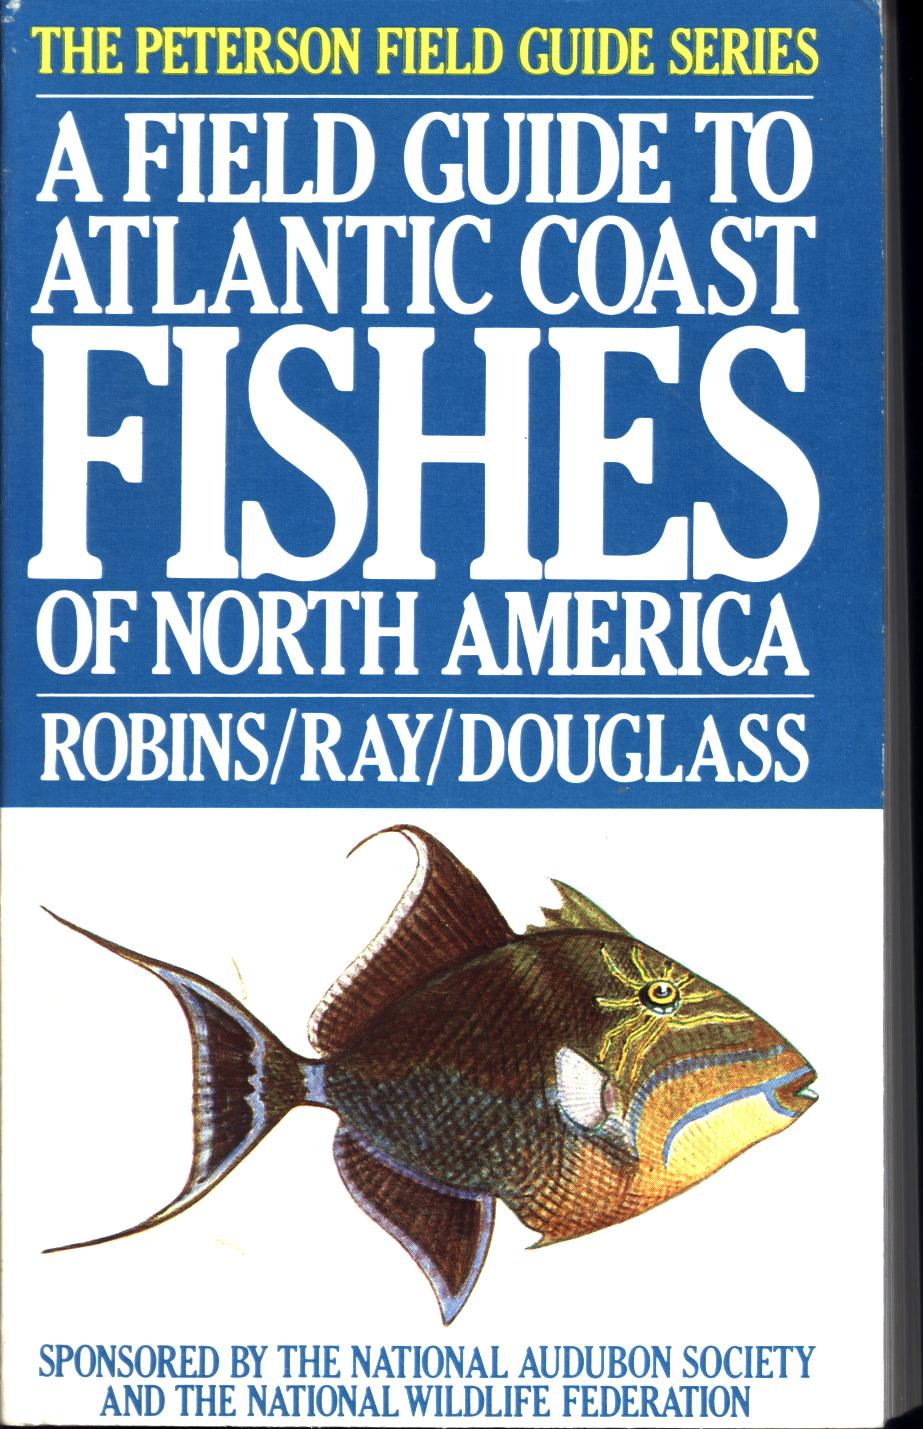 A FIELD GUIDE TO ATLANTIC COAST FISHES OF NORTH AMERICA. 